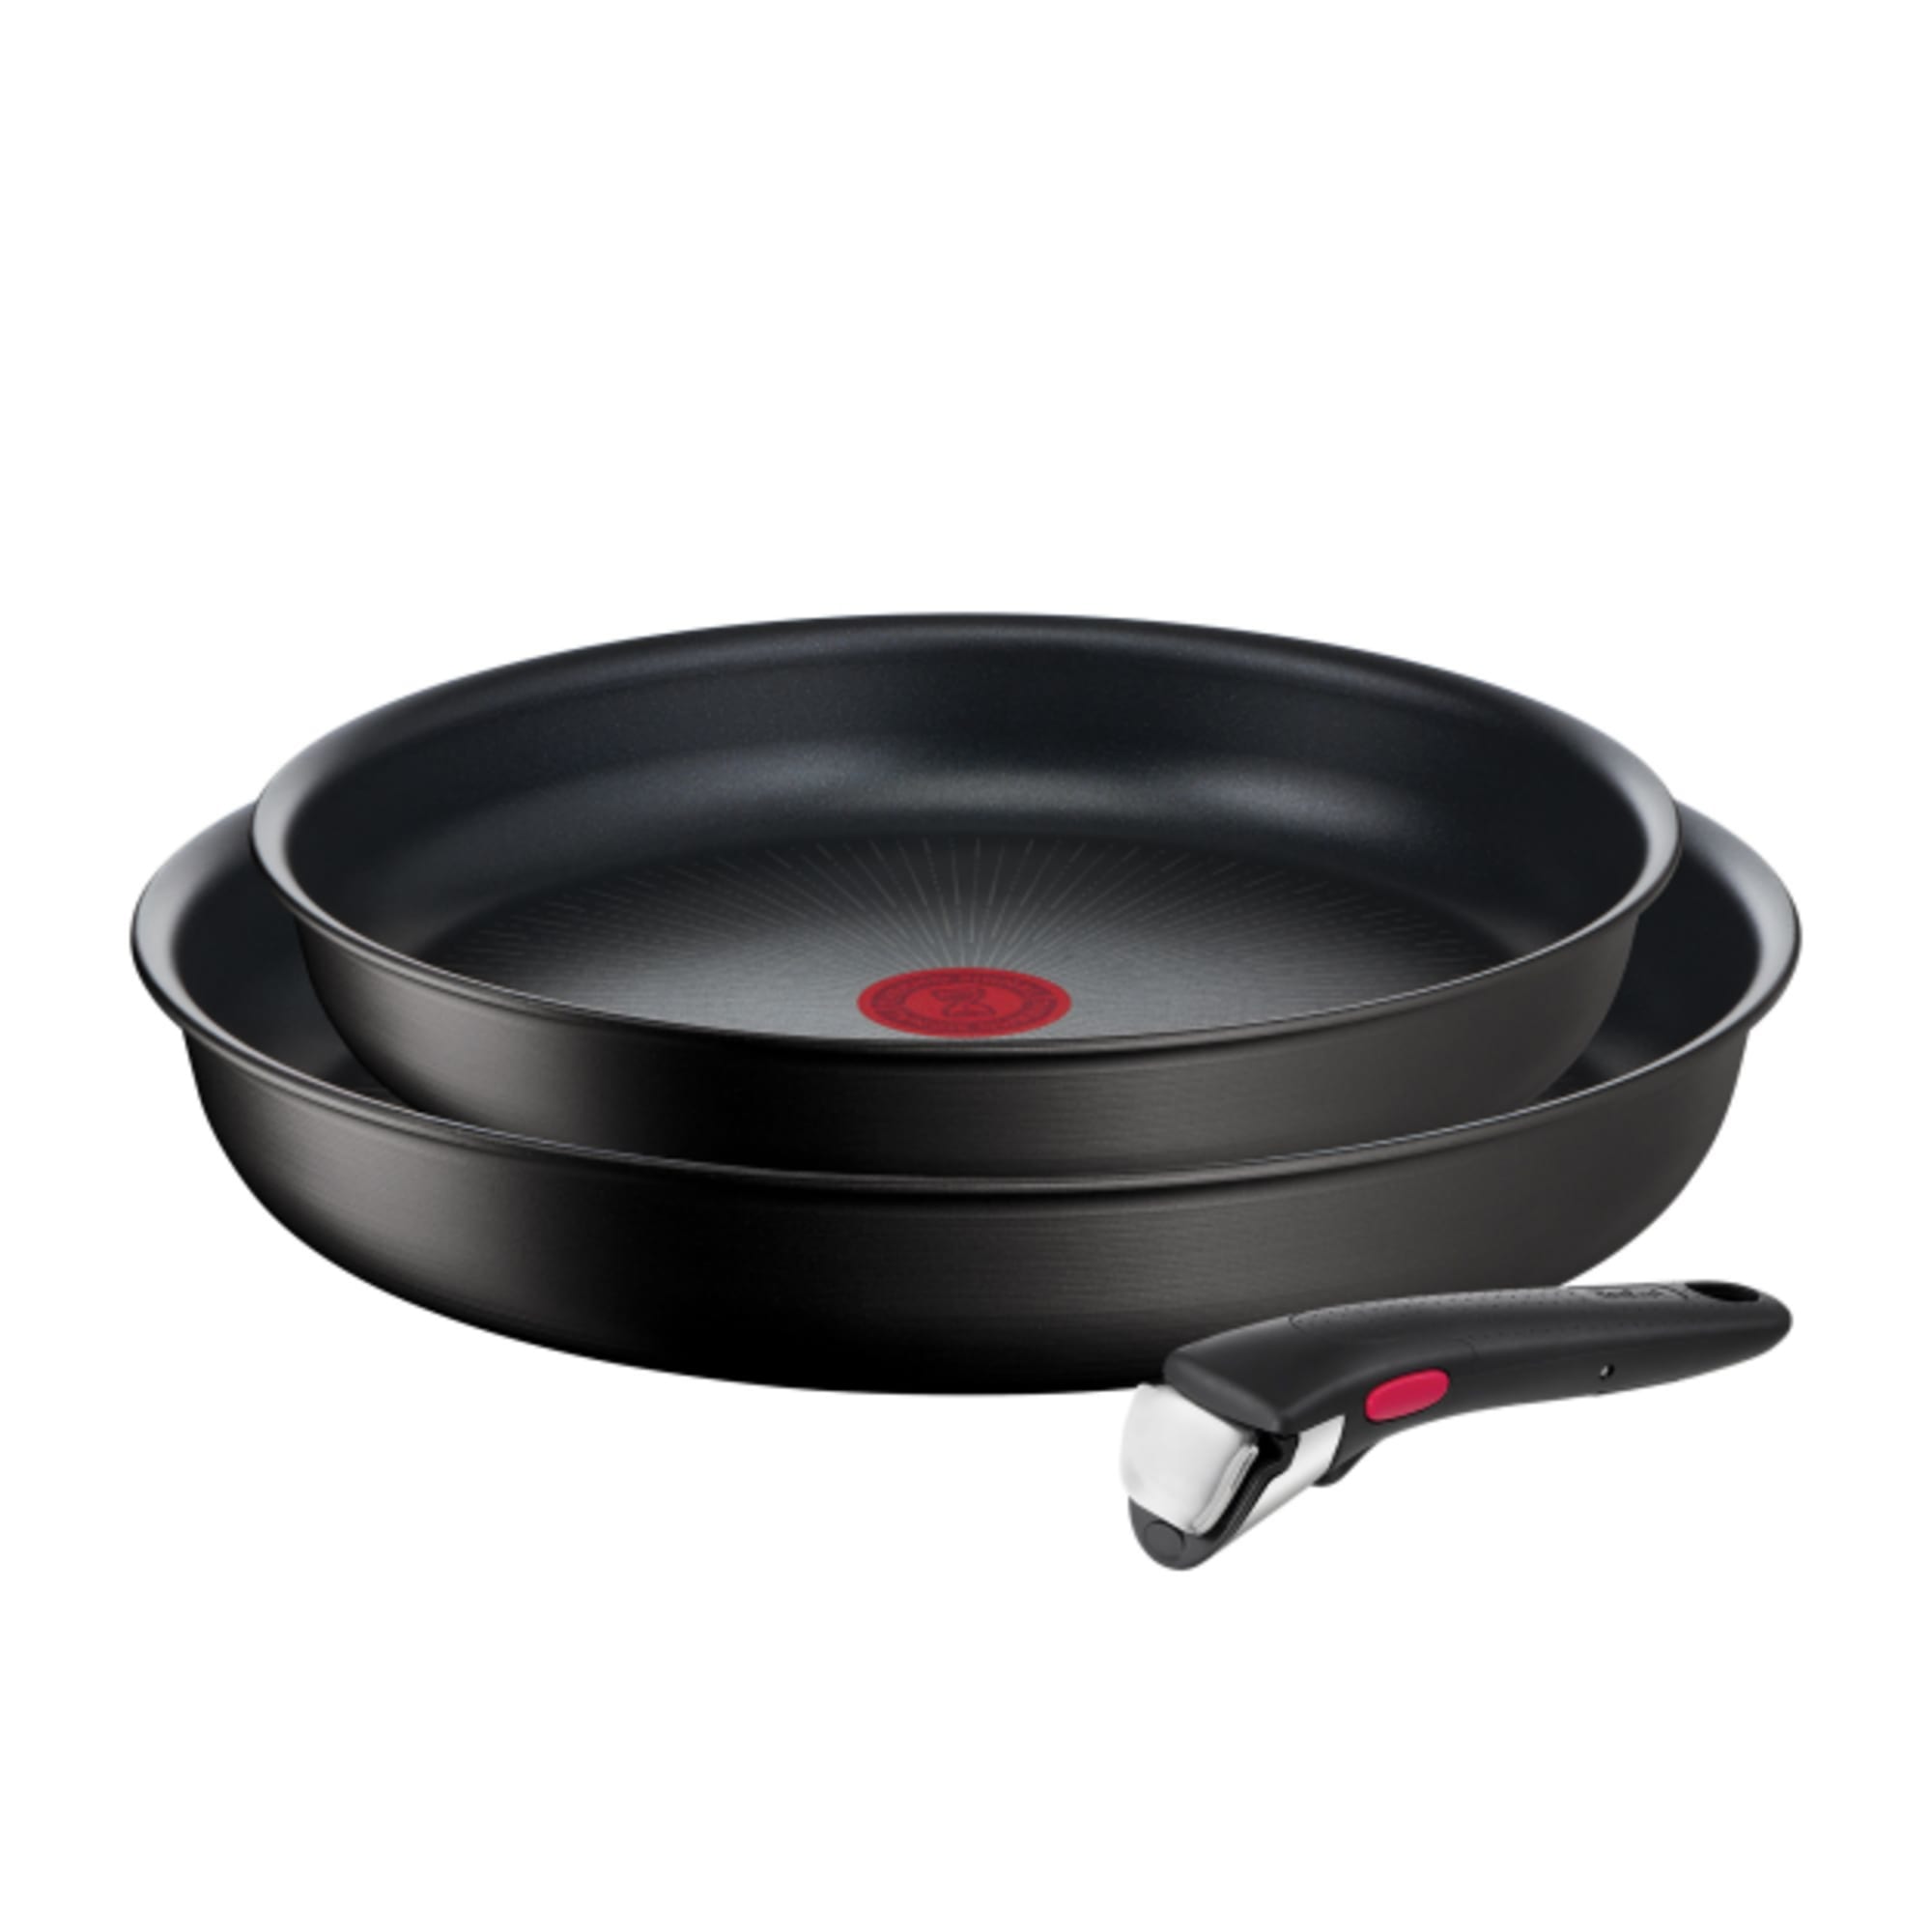 Tefal Gourmet Crepe Pan, Two Removable Plates, Non-Stick Coating